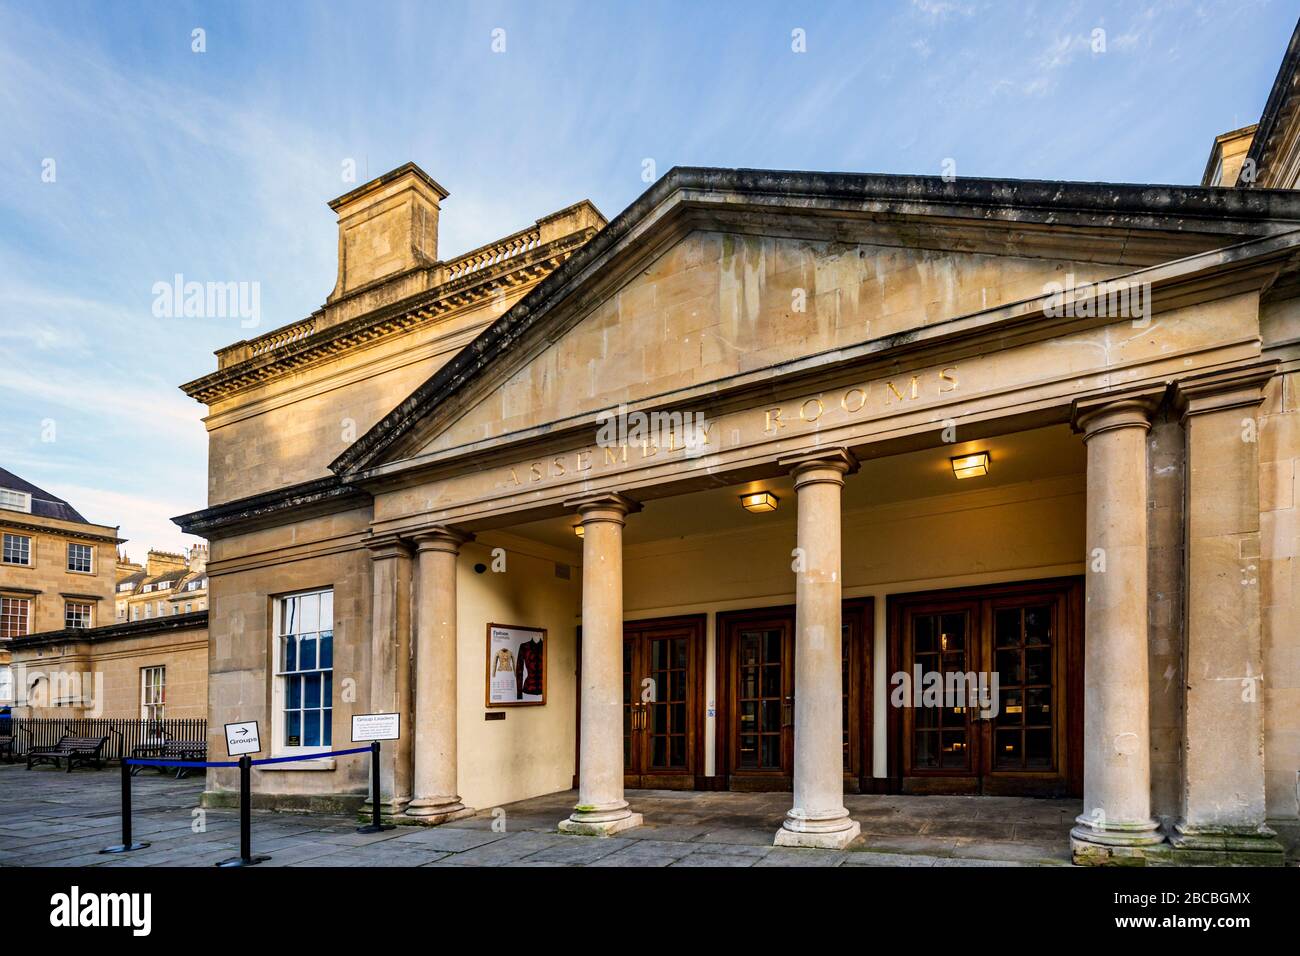 the West front entrance to the Grade I listed Assembly Rooms in the centre of the city of Bath, England. Stock Photo